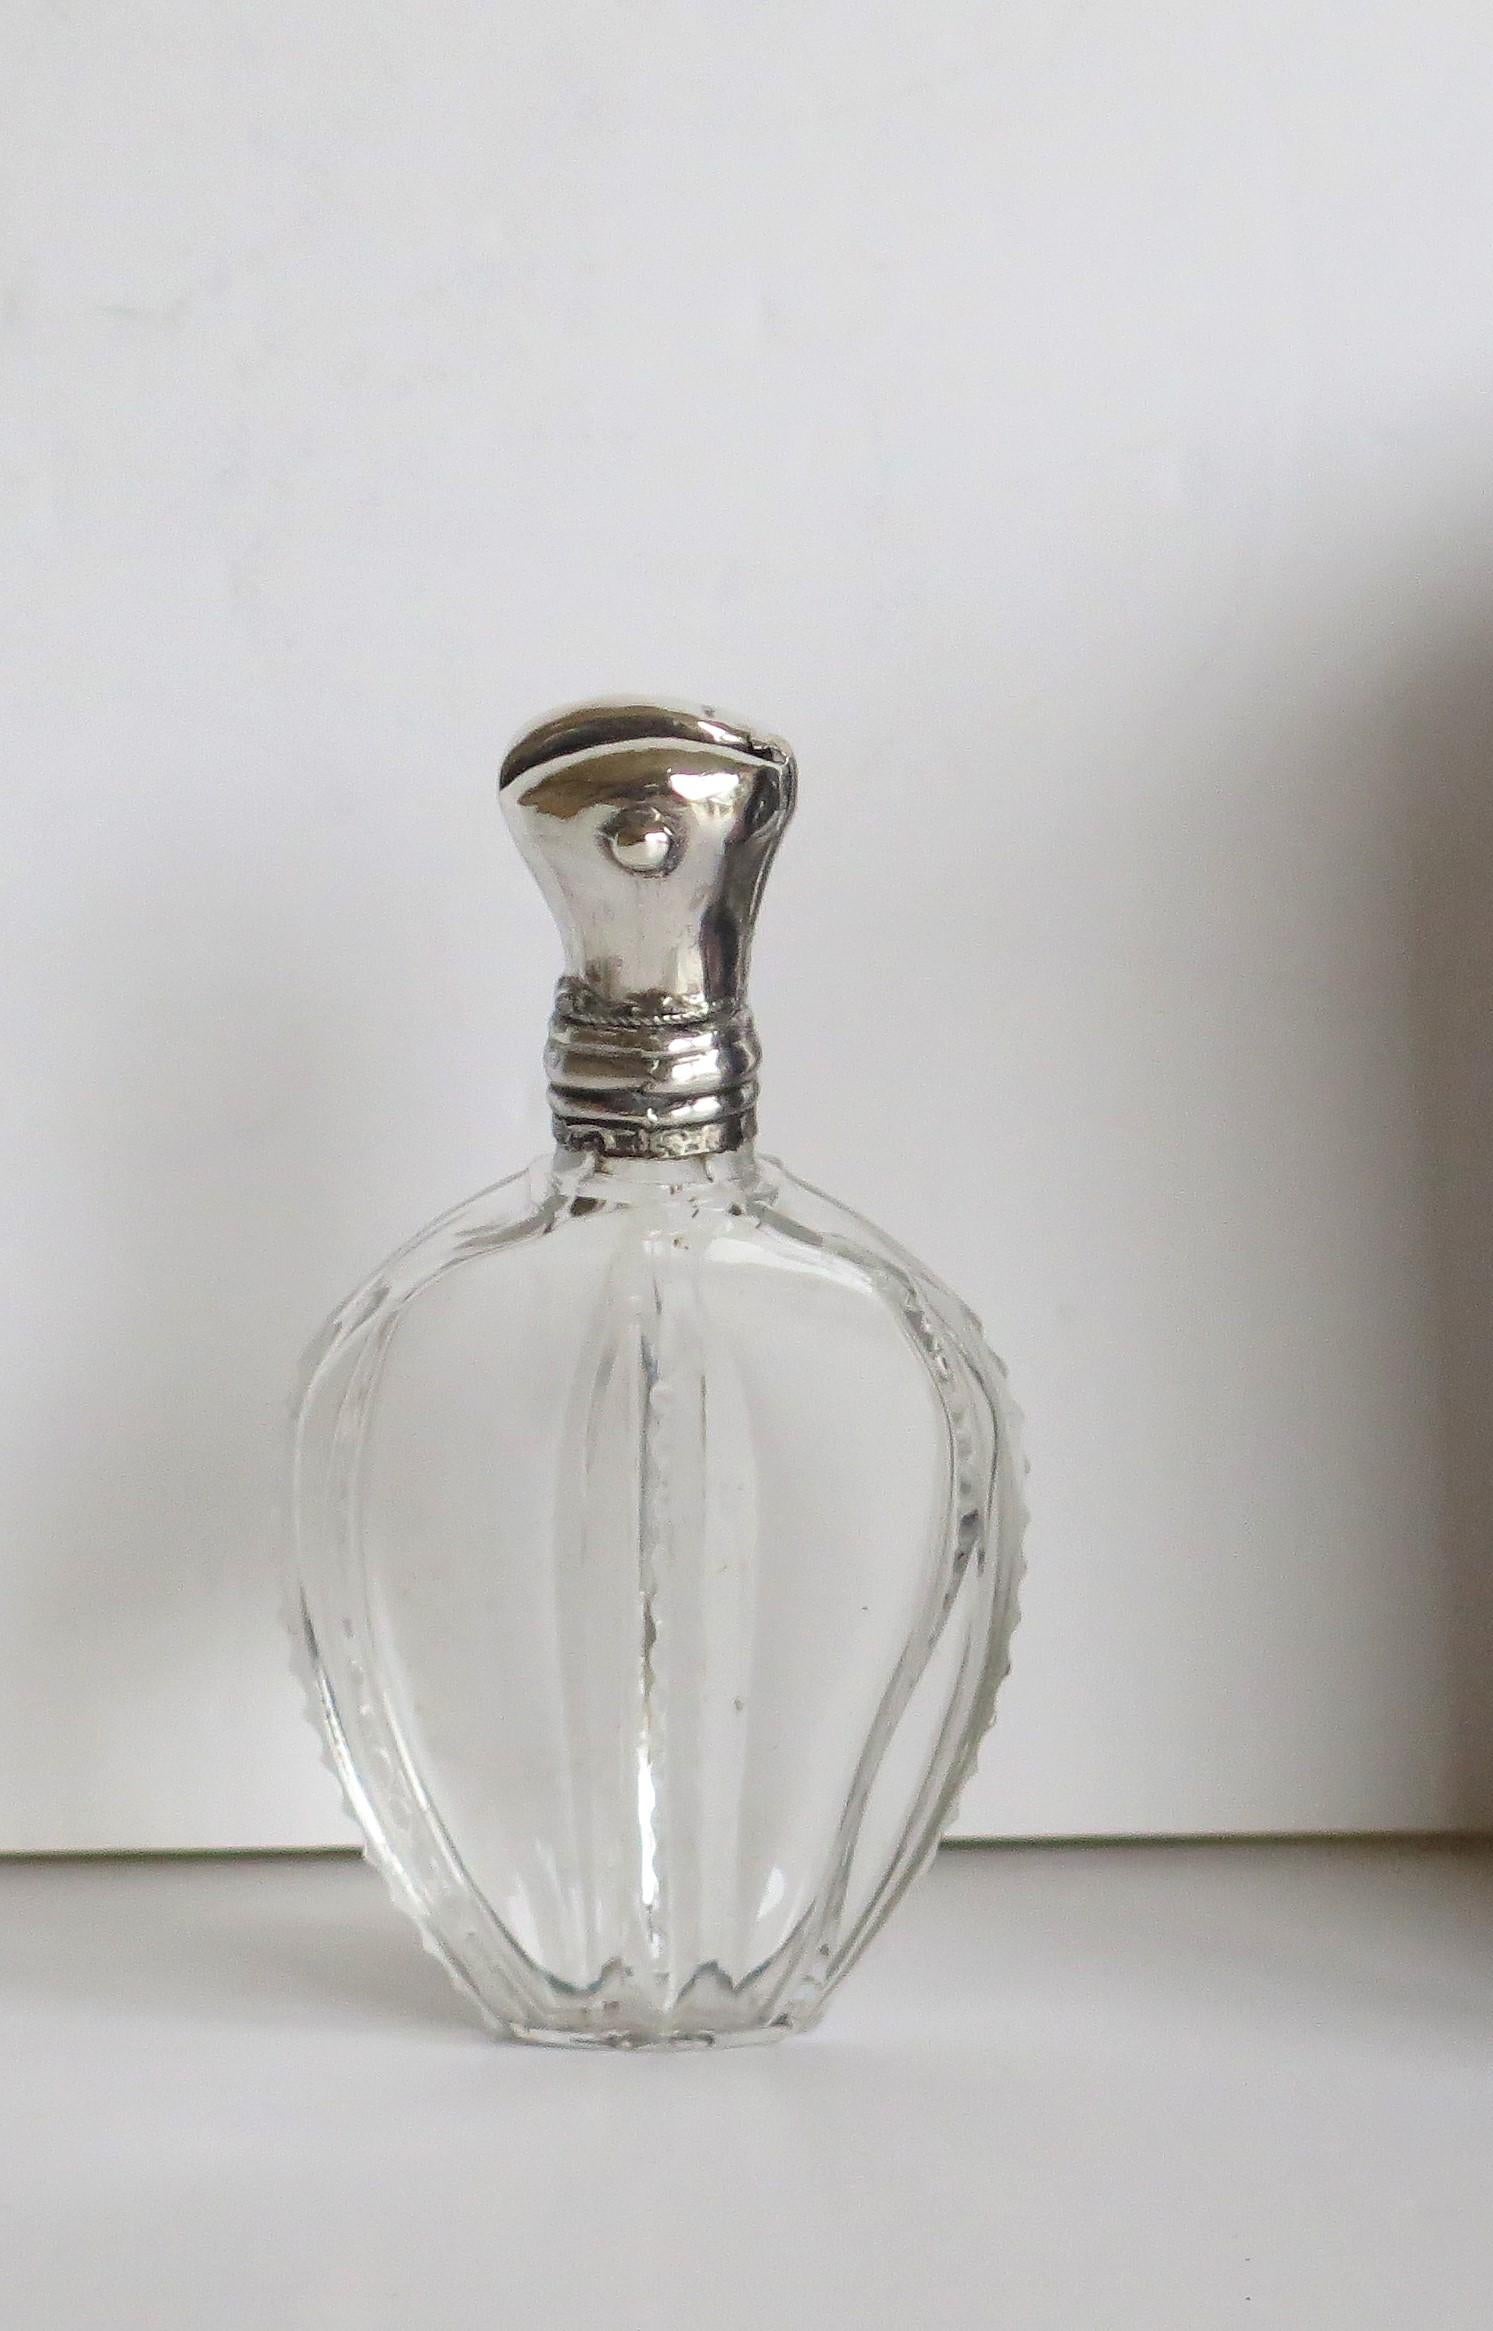 This is a good quality cut crystal glass perfume or scent bottle with a hinged silver top, very much in the Art Nouveau style, probably by a French maker and dating to the late 19th century, circa 1880.

The crystal cut glass bottle has an elegant